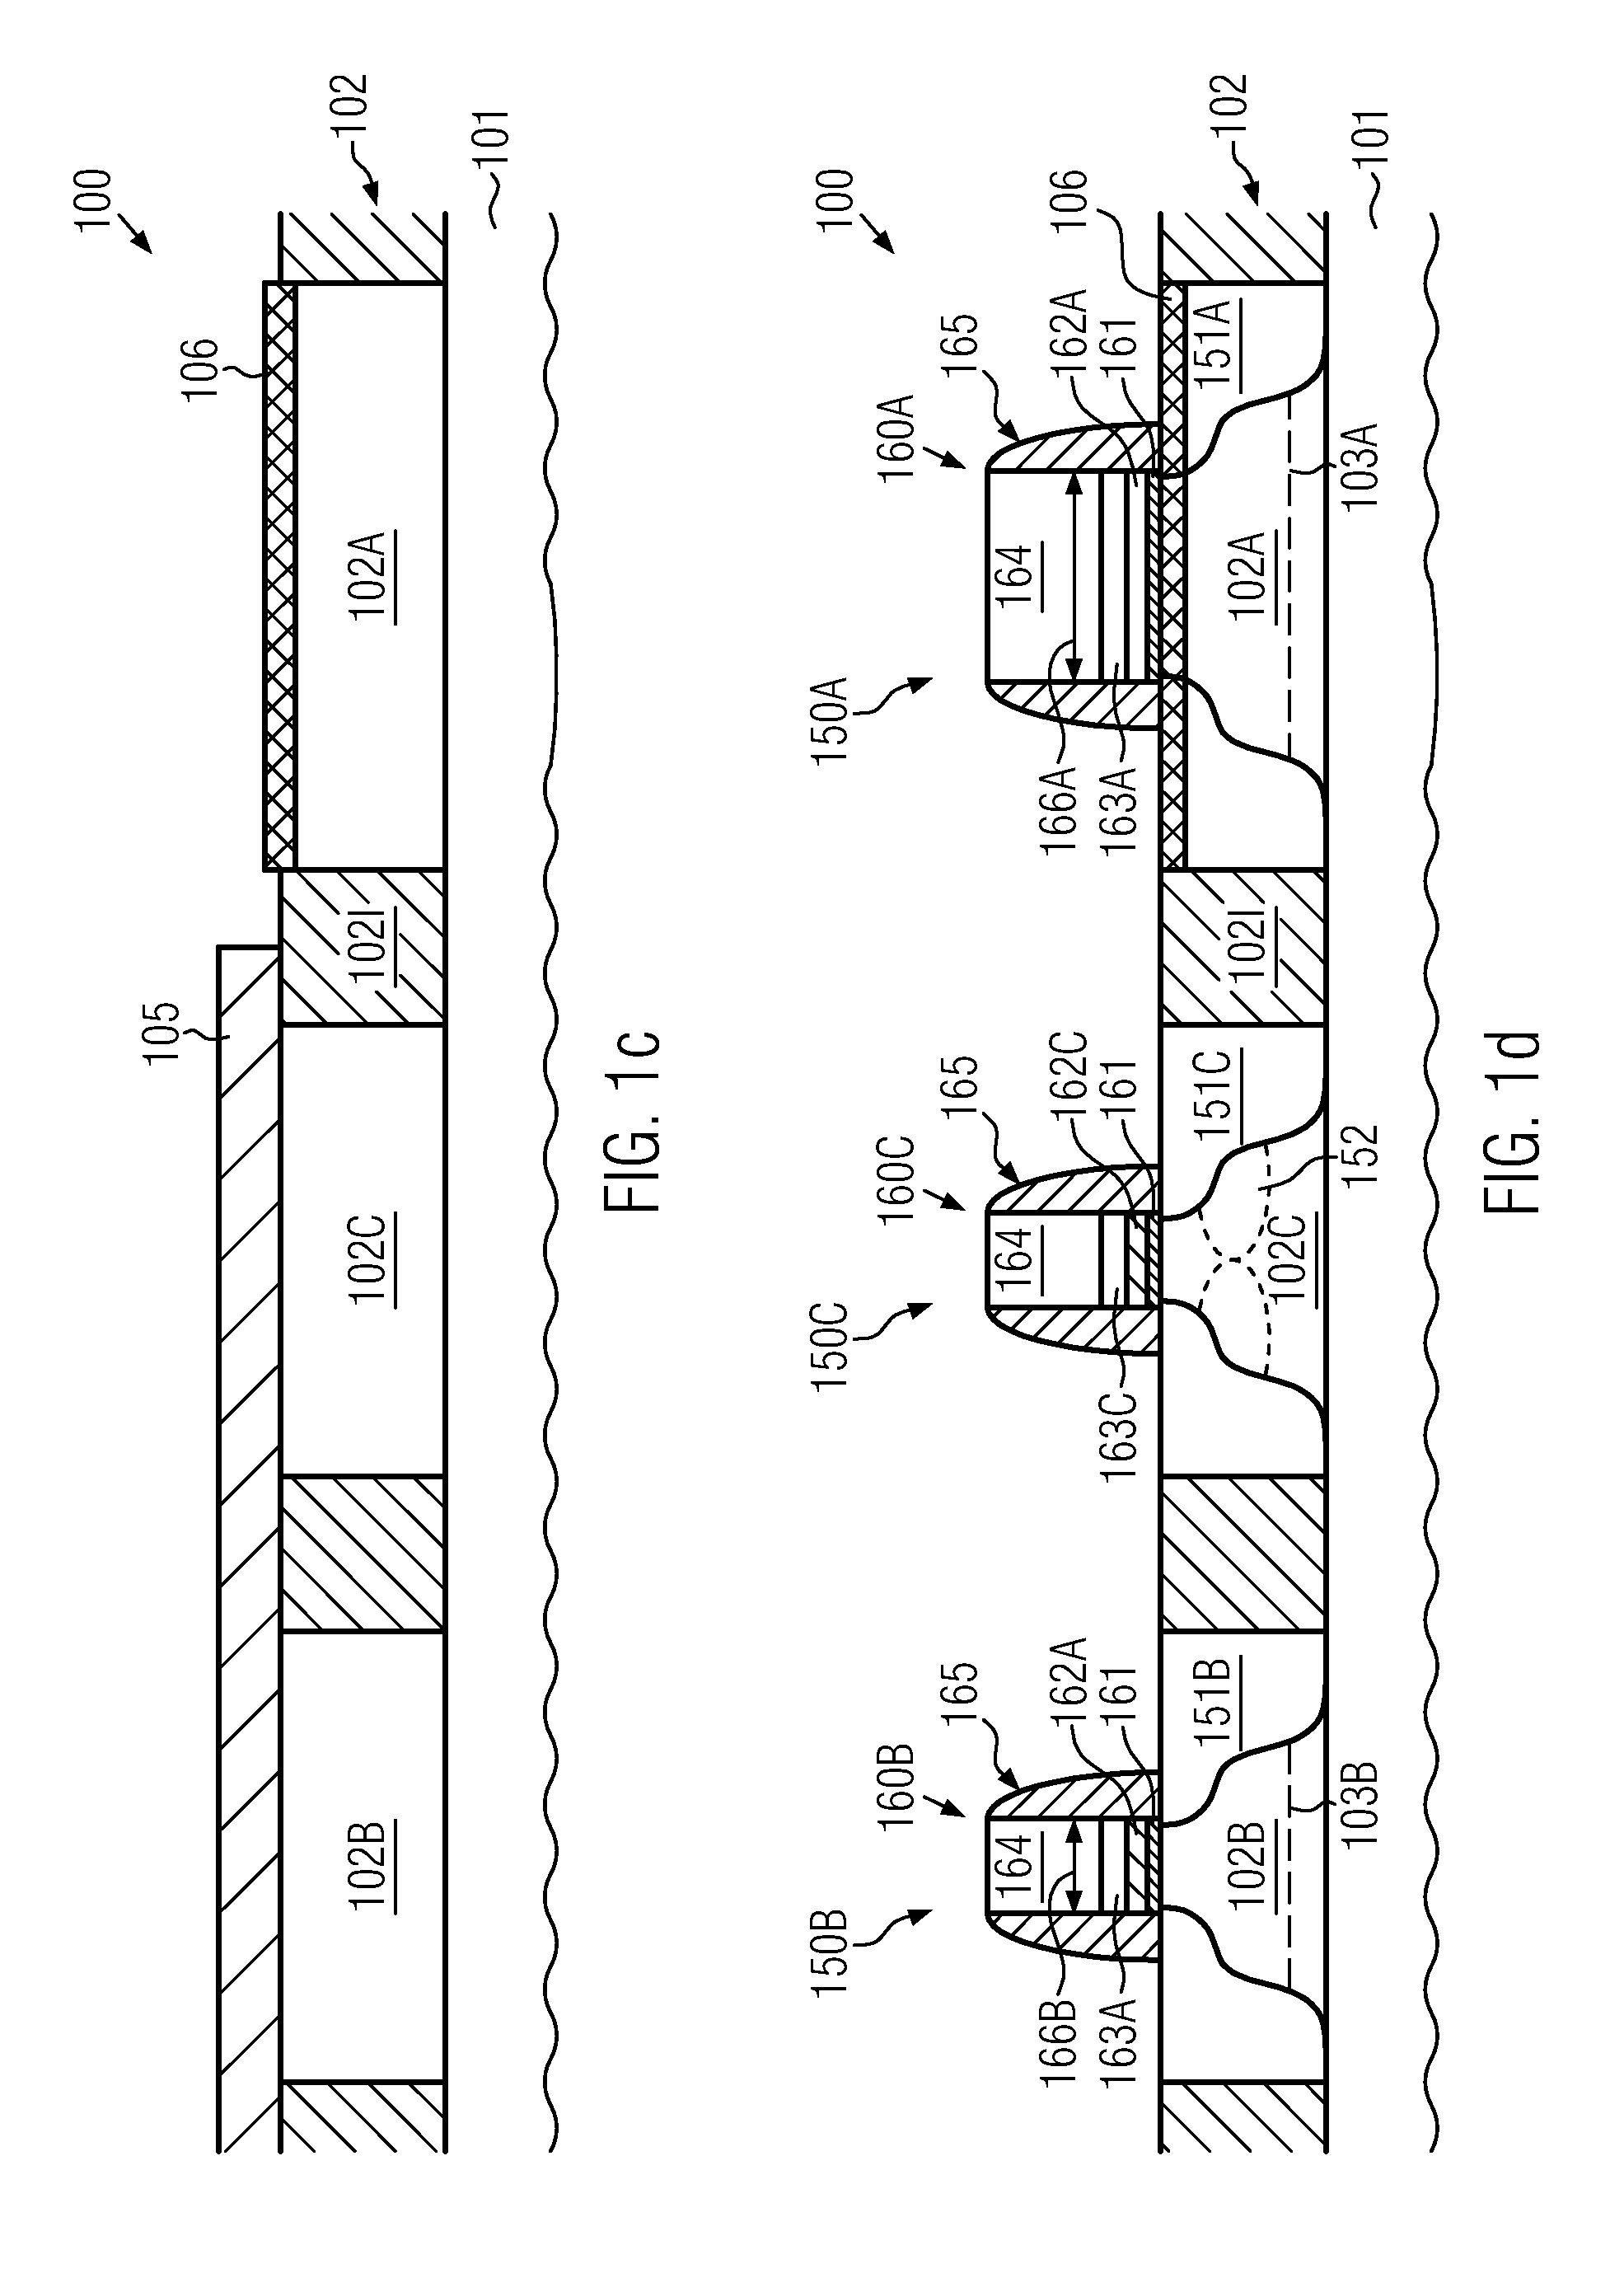 Differential Threshold Voltage Adjustment in PMOS Transistors by Differential Formation of a Channel Semiconductor Material